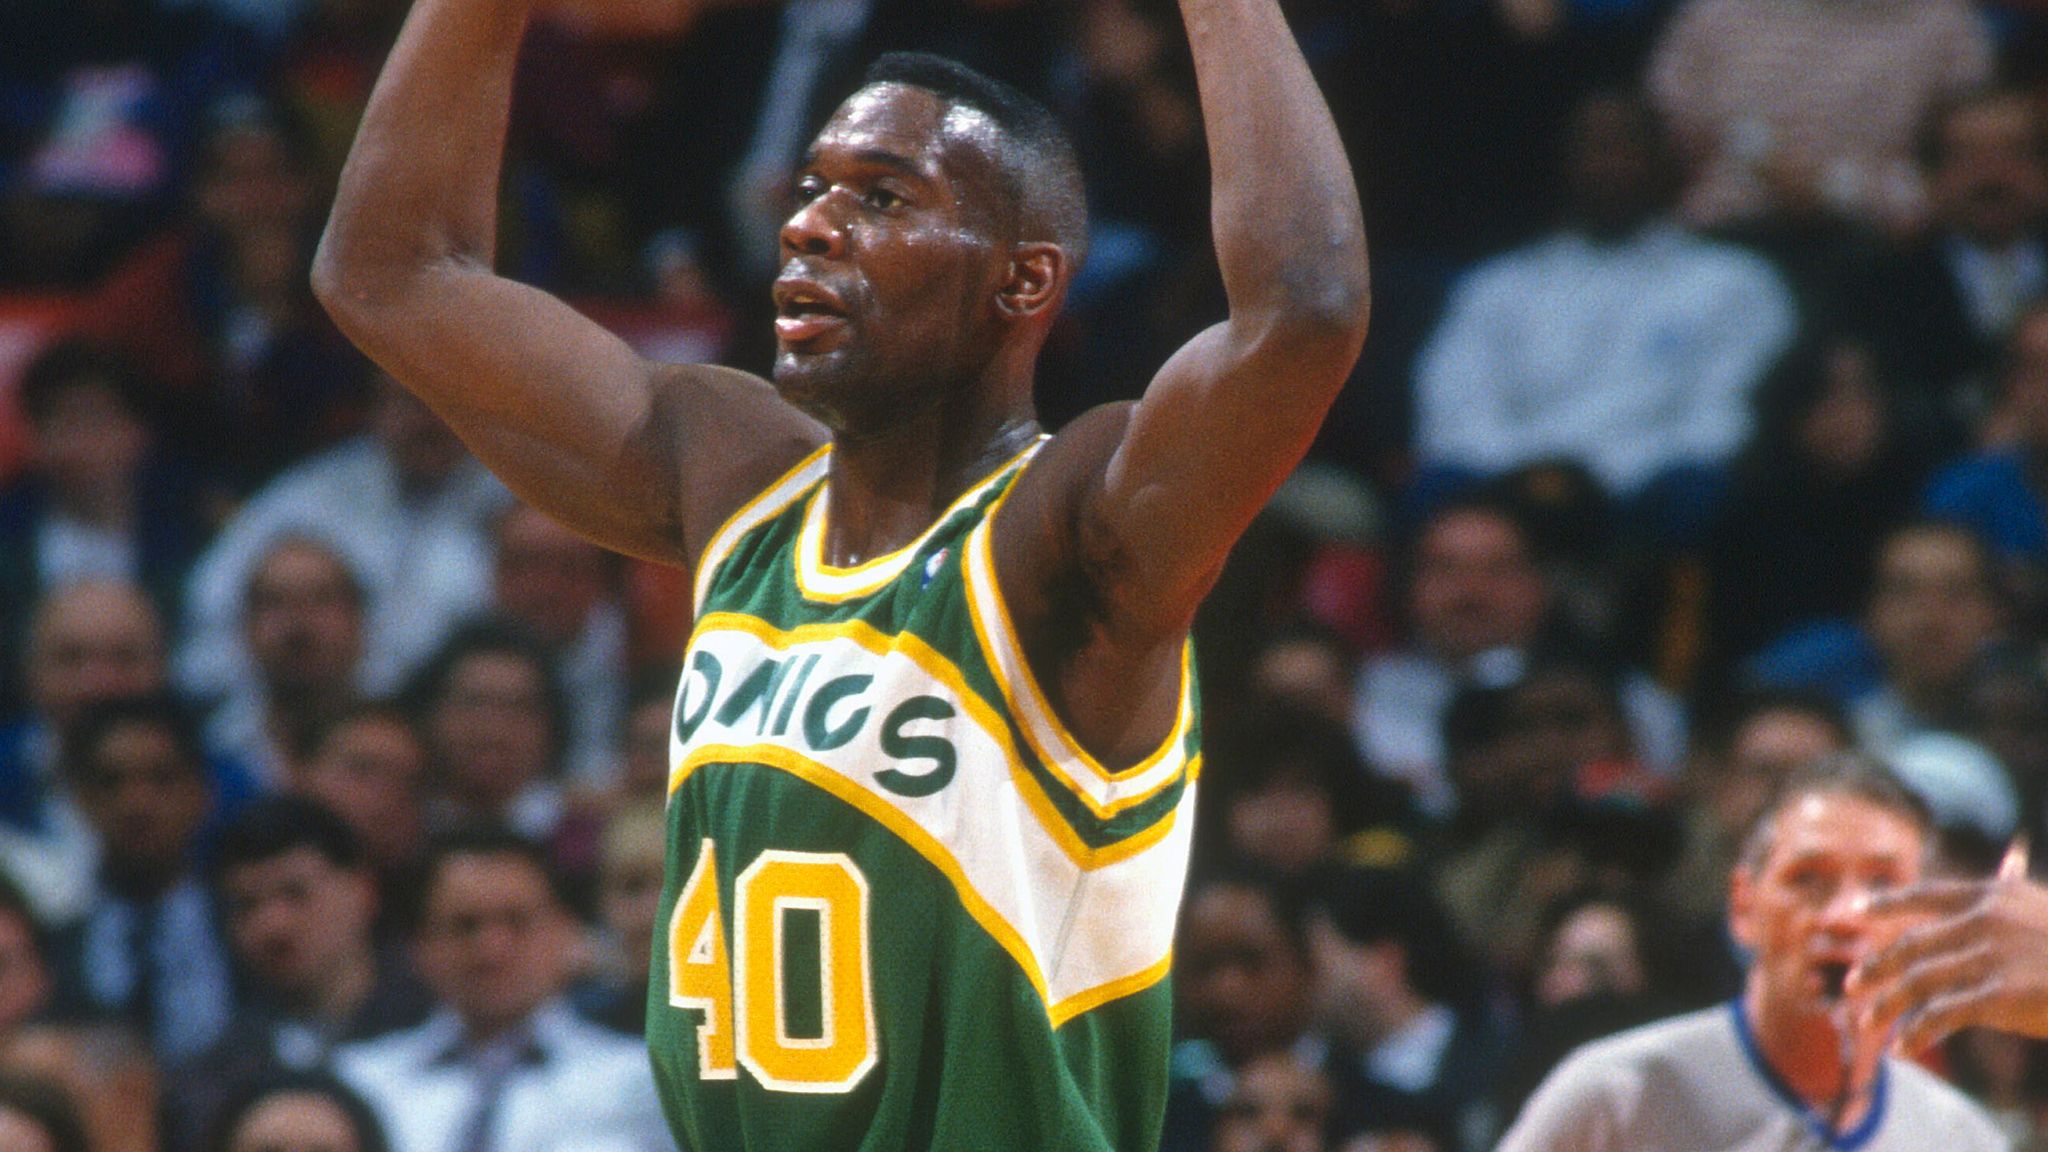 NBA Buzz on X: Happy 53rd birthday to one of the most exciting players  & best dunkers in NBA history, Shawn Kemp! Kemp started dunking in 5th  grade, at age 10, which